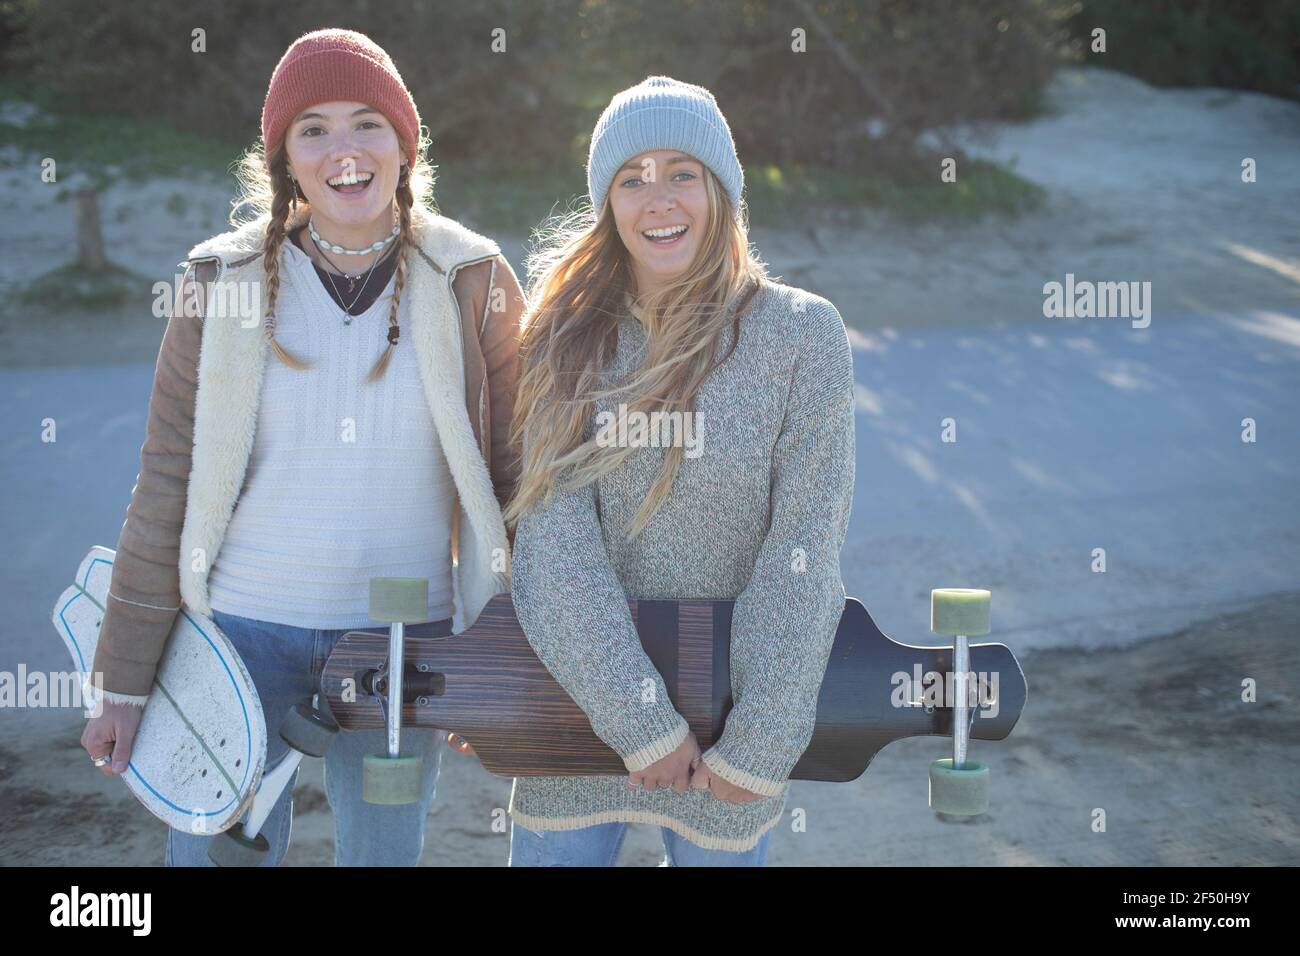 Portrait happy young women friends in knit hats with skateboards Stock Photo